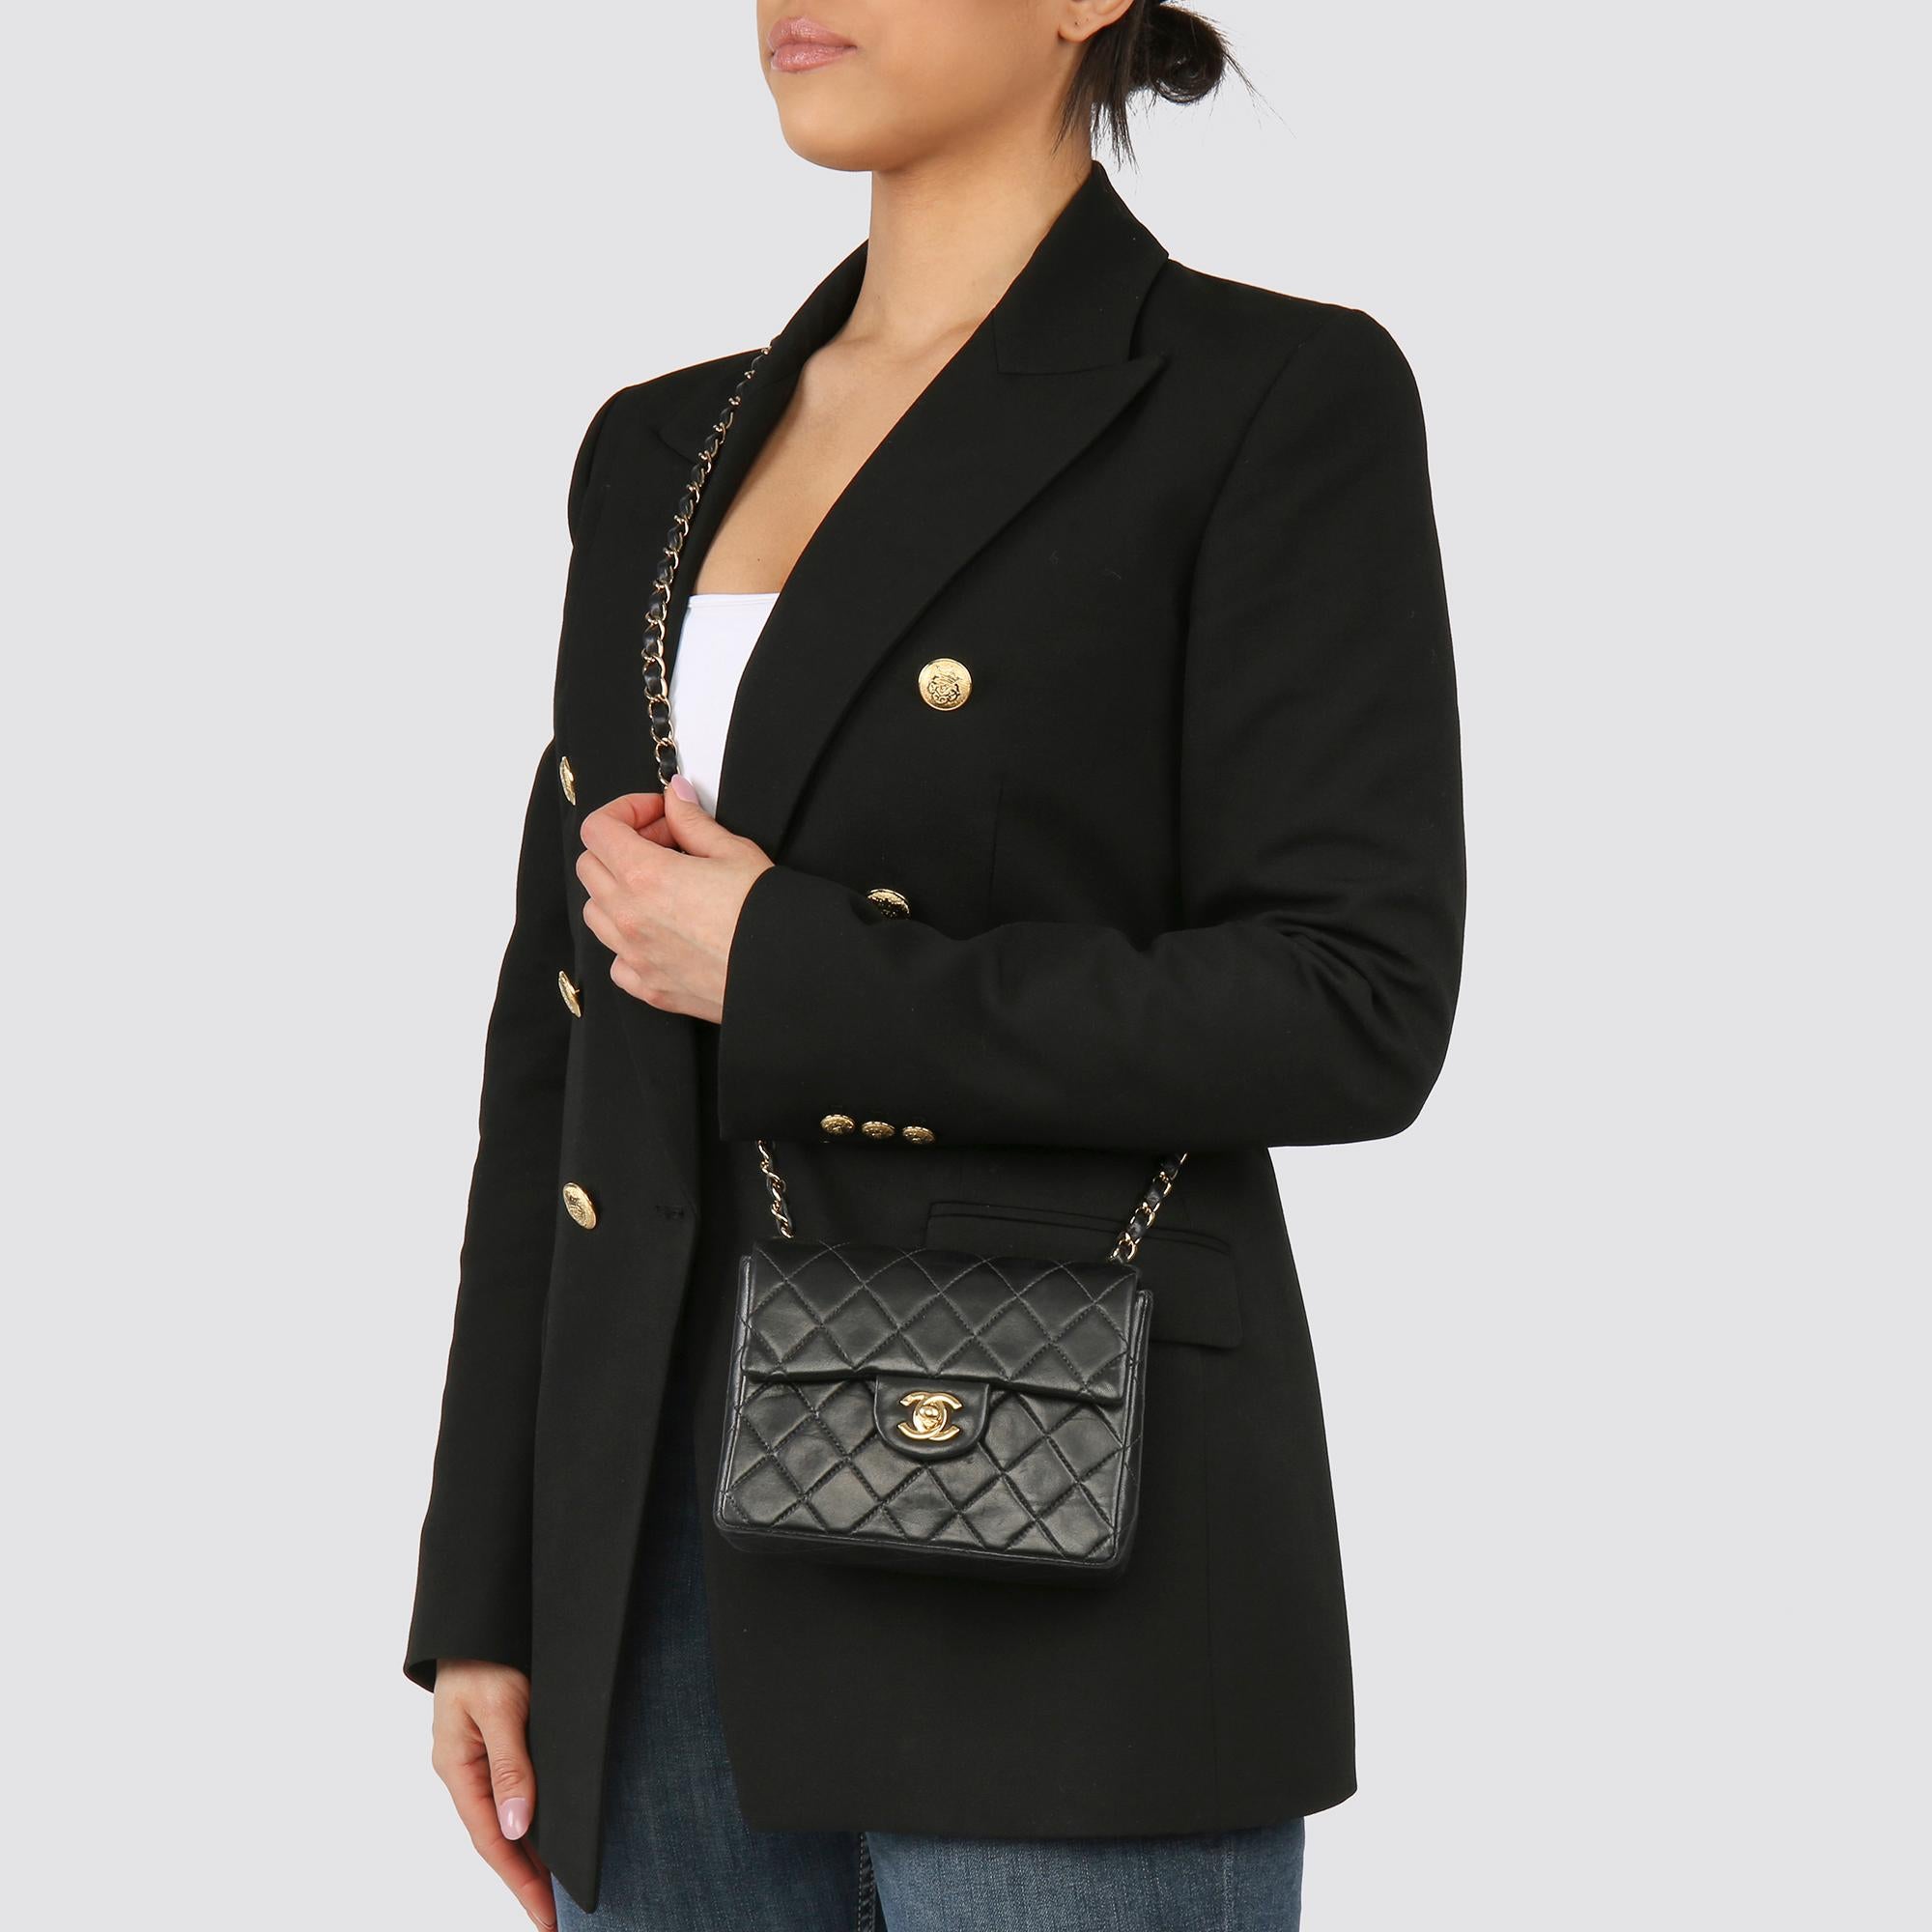 CHANEL
Black Quilted Lambskin Mini Flap Bag

Serial Number: 8229828
Age (Circa): 2003
Accompanied By: Chanel Dust Bag, Authenticity Card
Authenticity Details: Authenticity Card, Serial Sticker (Made in France)
Gender: Ladies
Type: Shoulder,